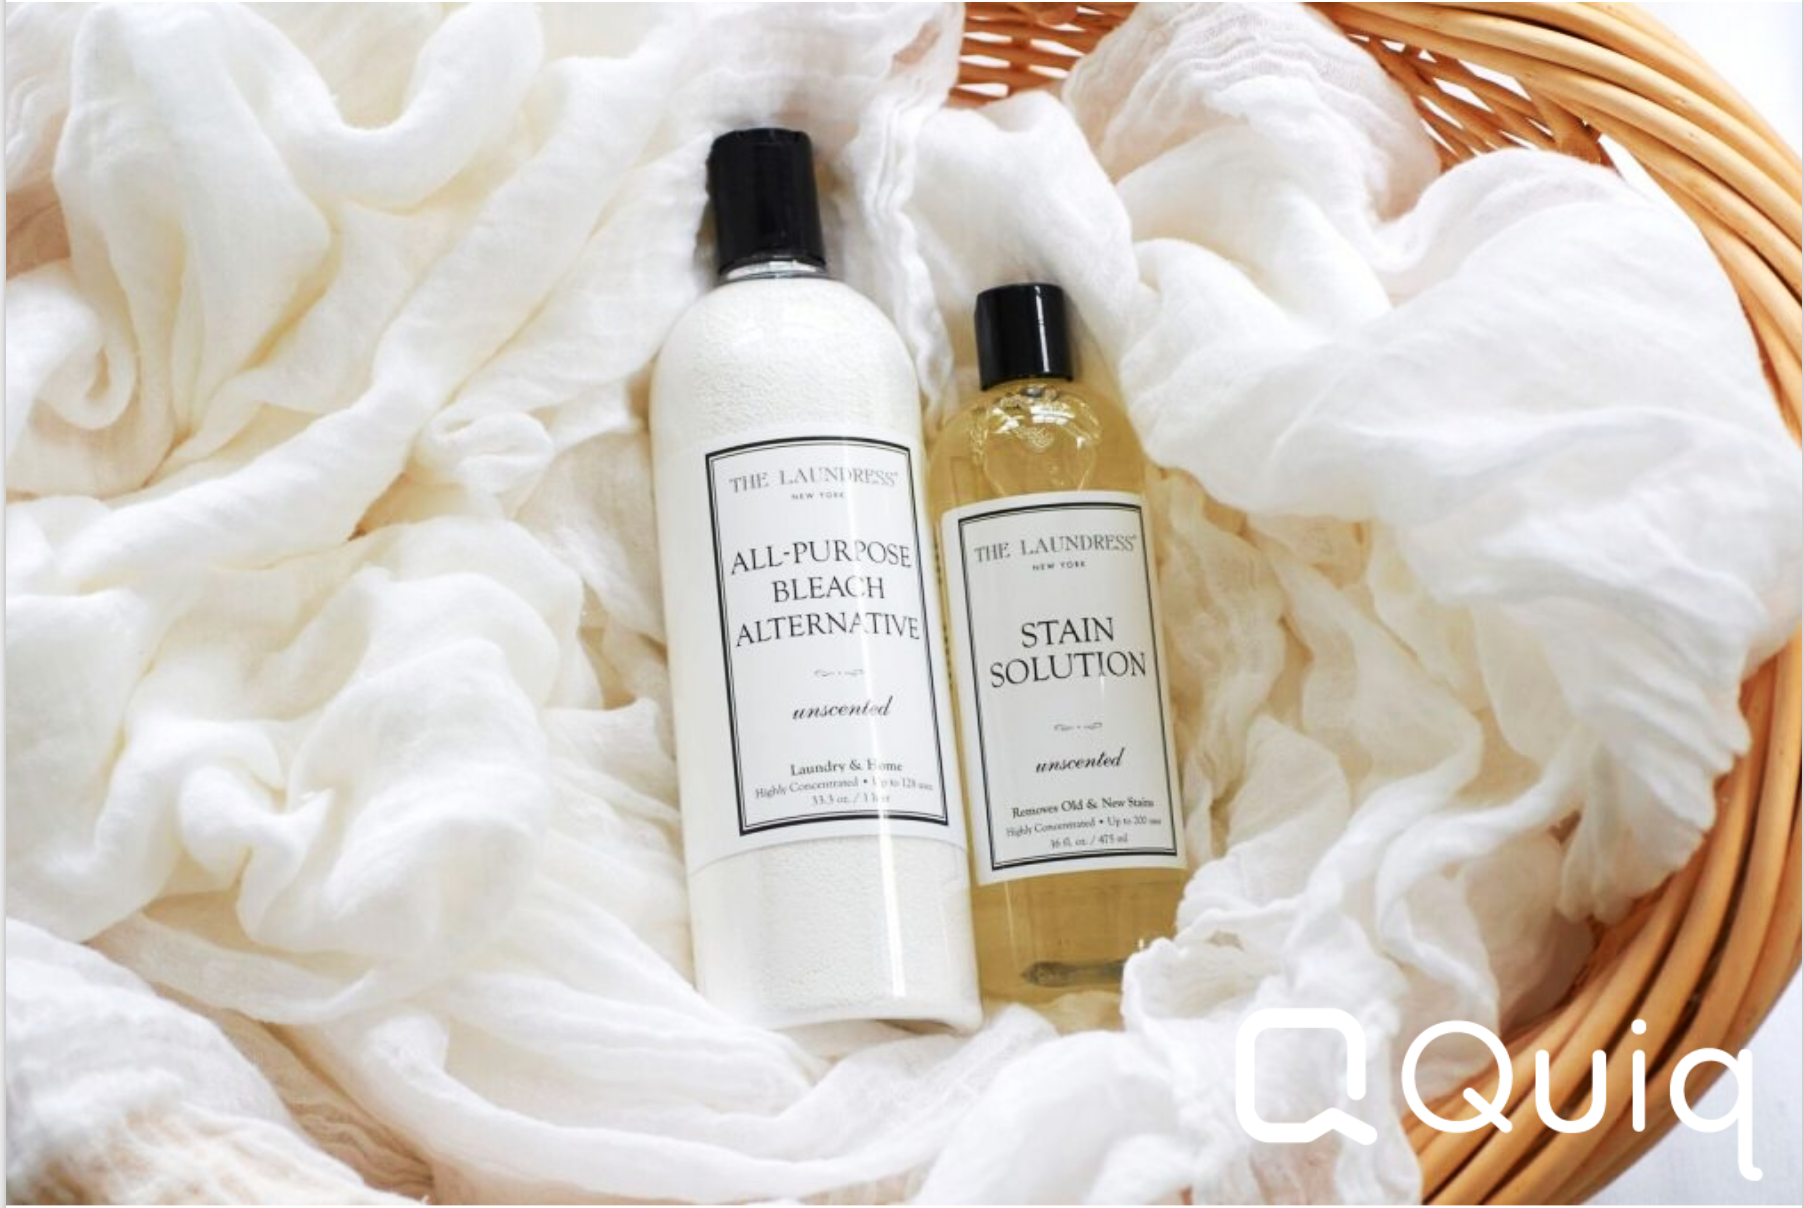 The Laundress Knows How to Handle With Care